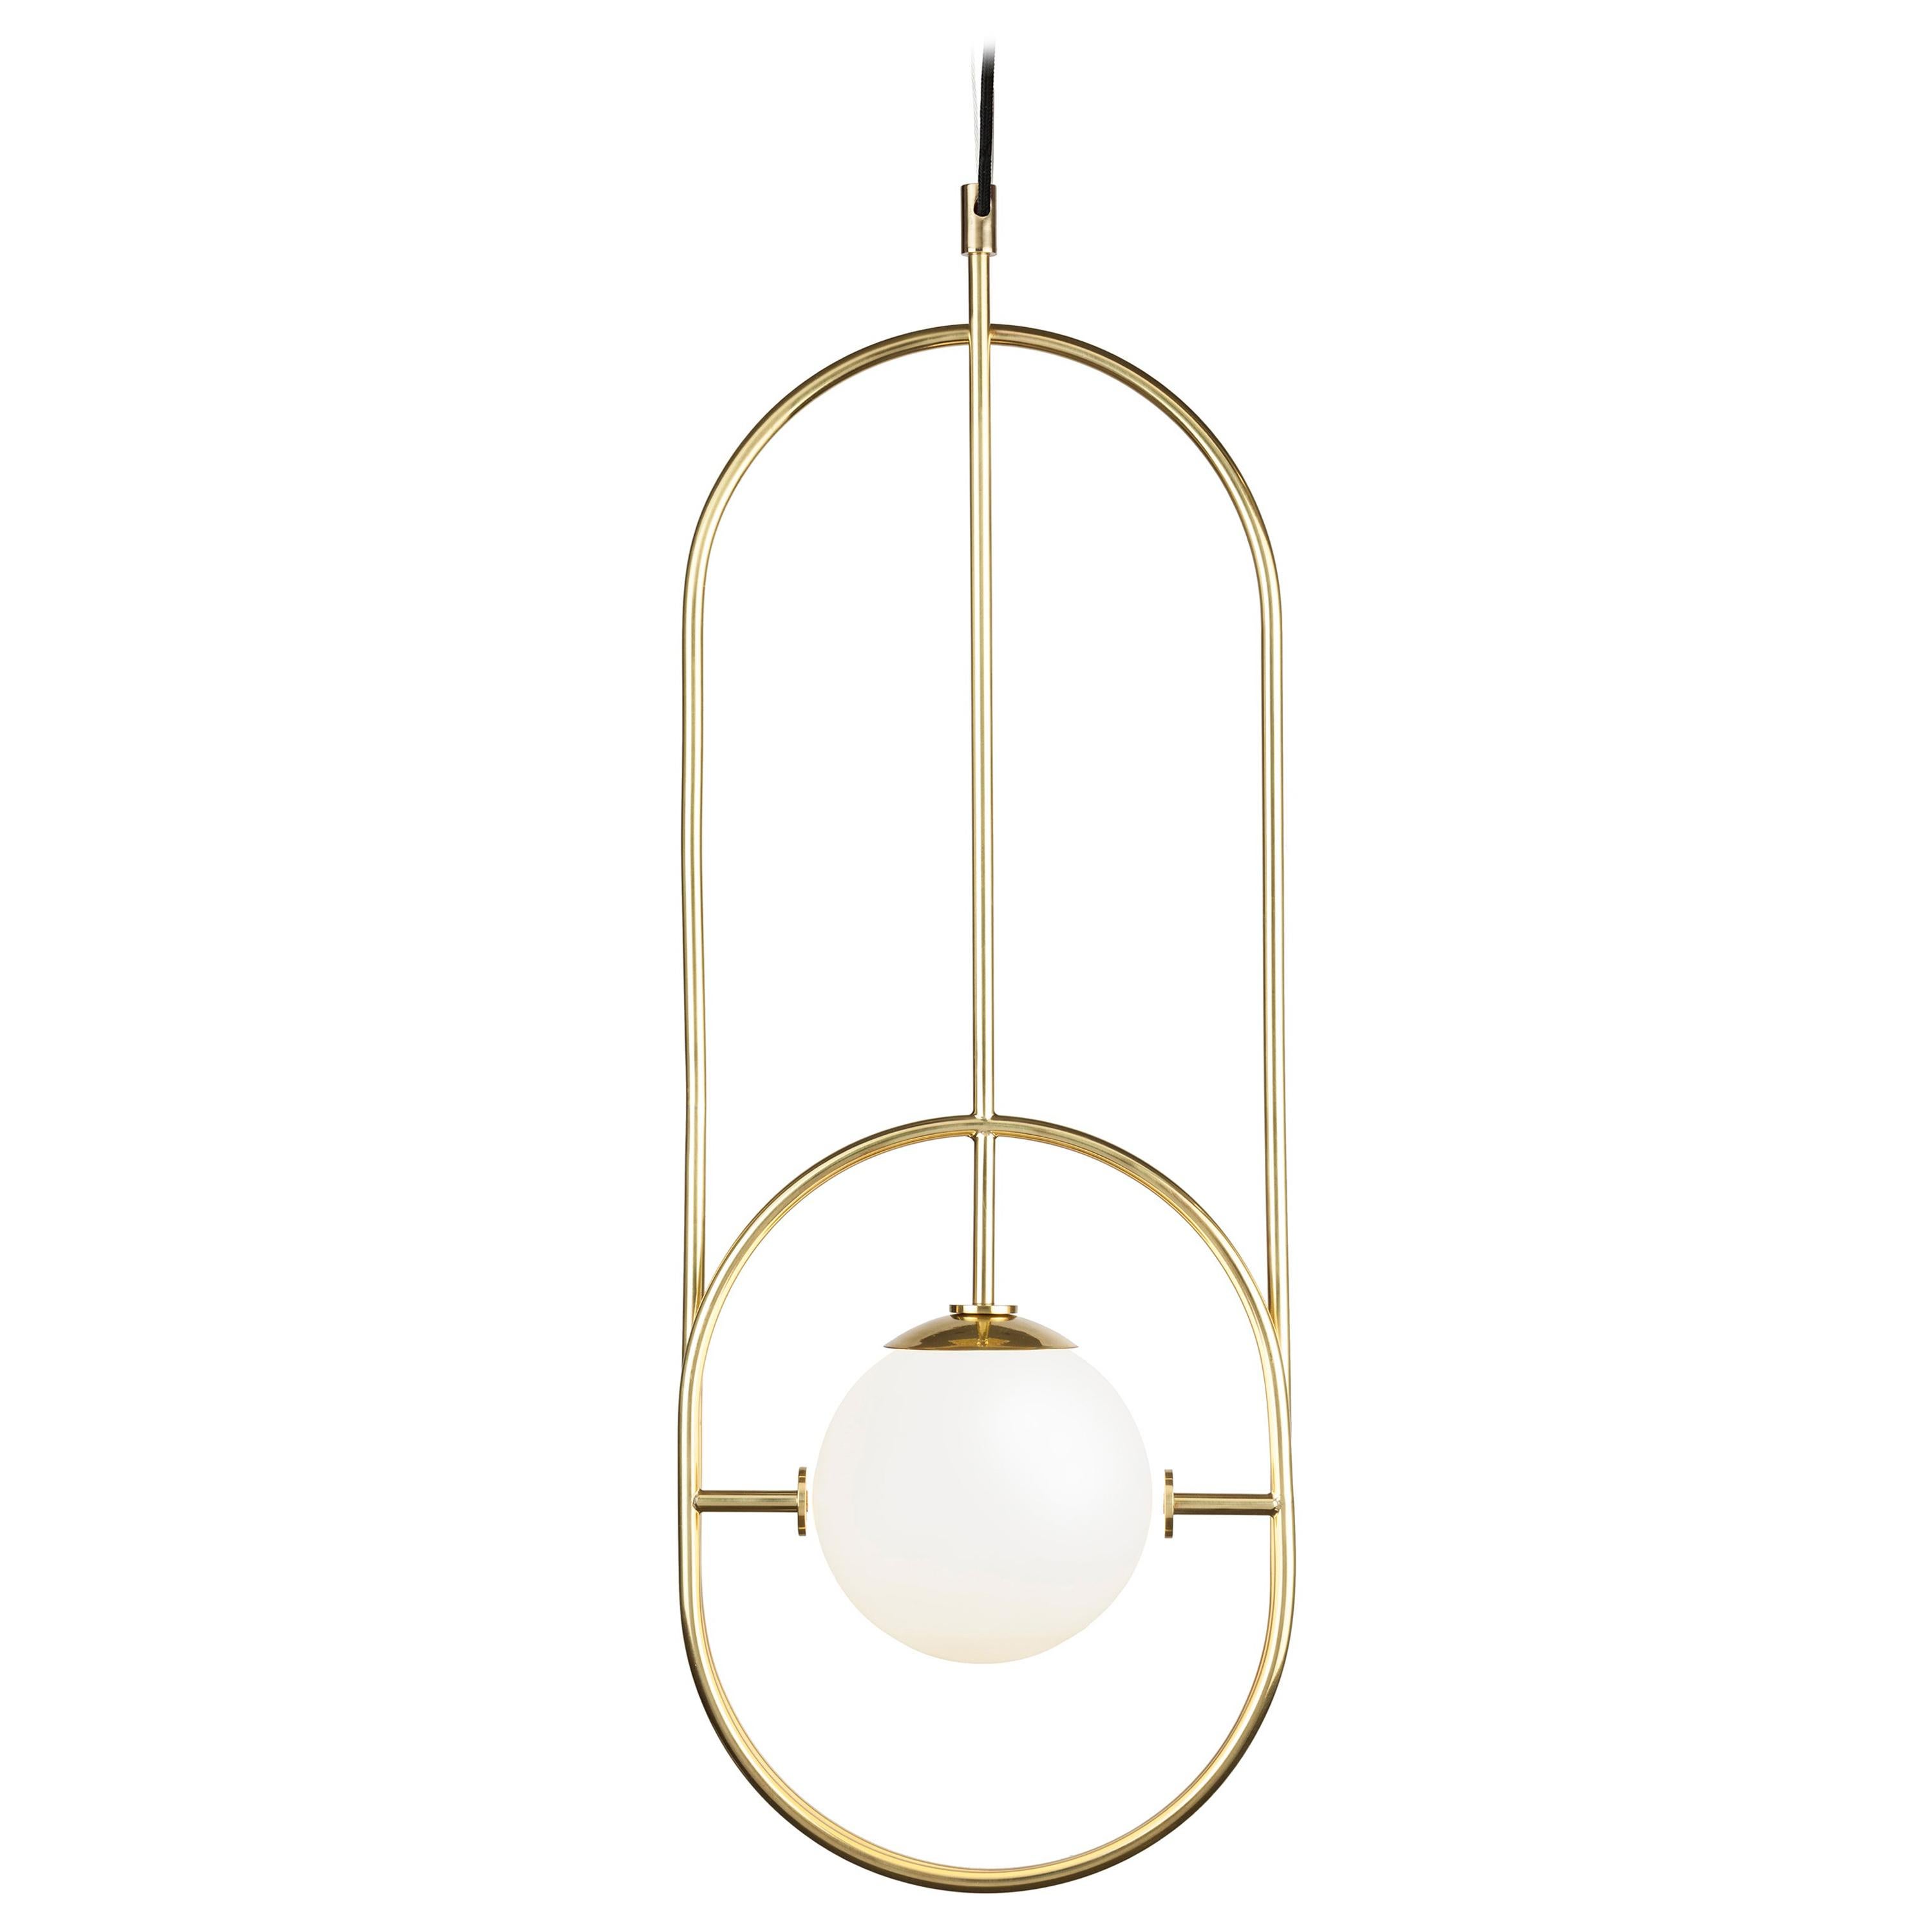 Art Deco inspired Loop I Pendant Lamp in Polished Brass Frosted Glass Handmade For Sale